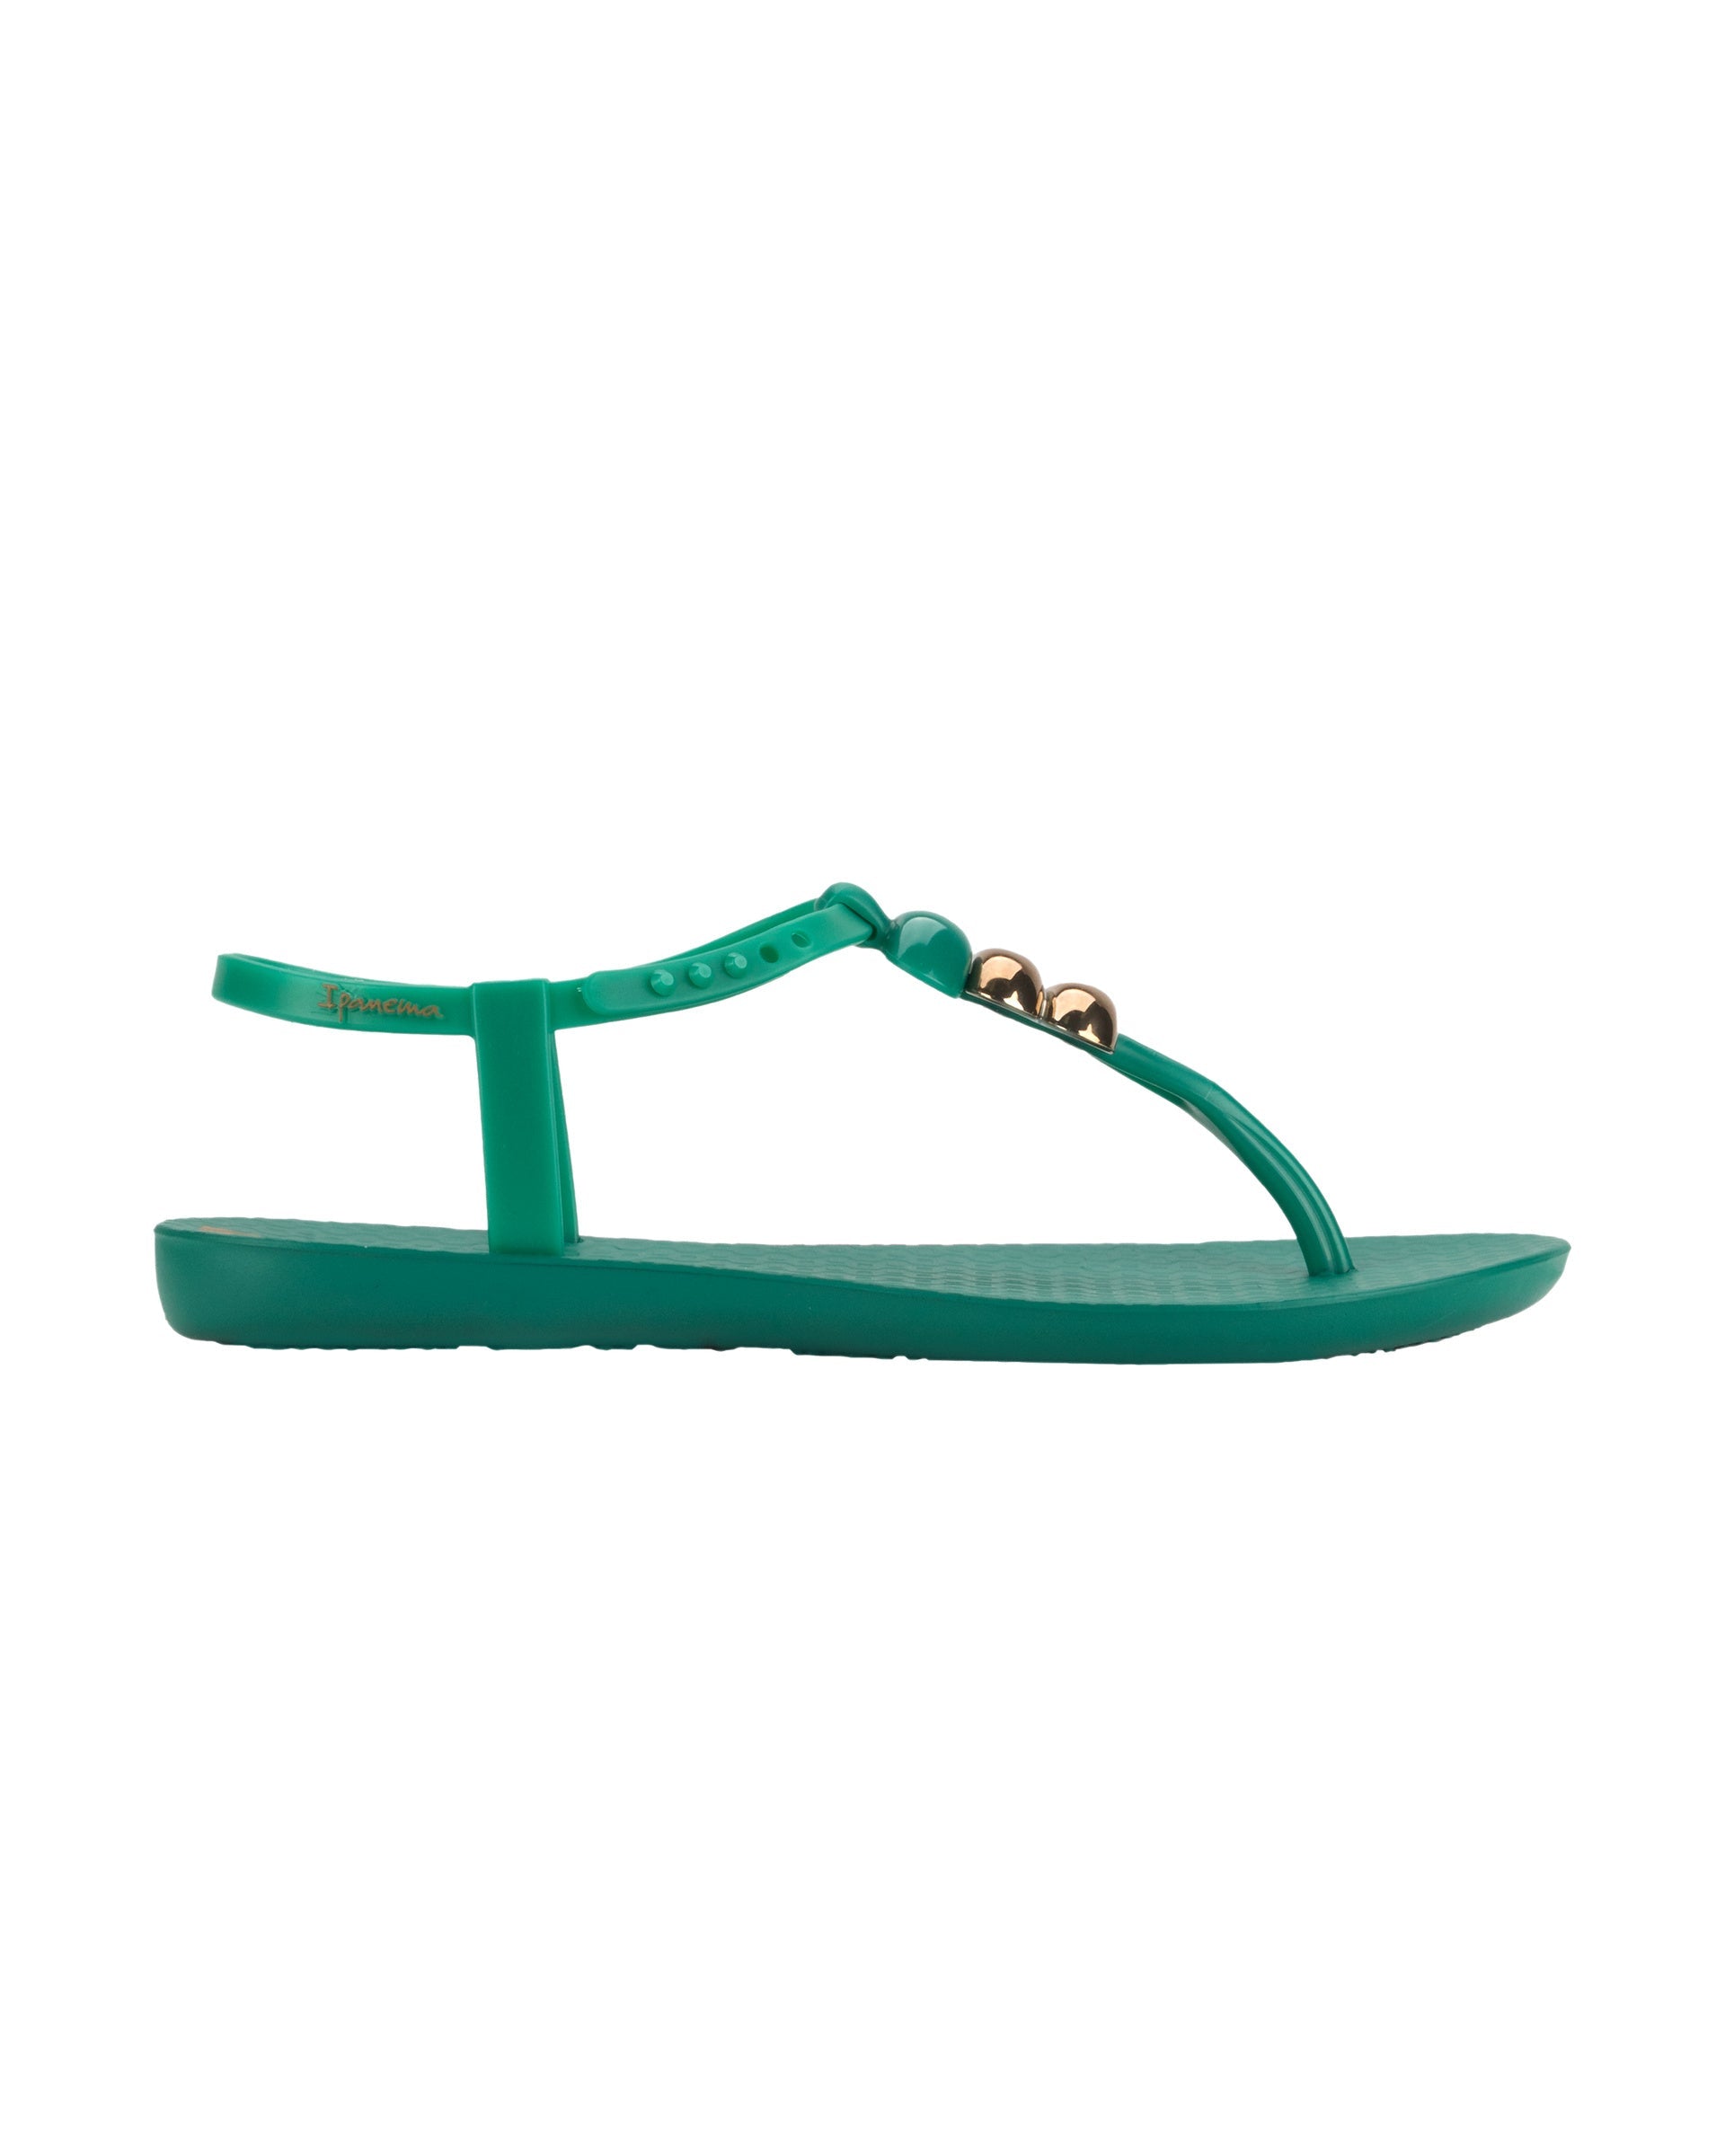 Outer side view of a green Ipanema Class women's sandal with 3 bubble baubles on the t-strap.